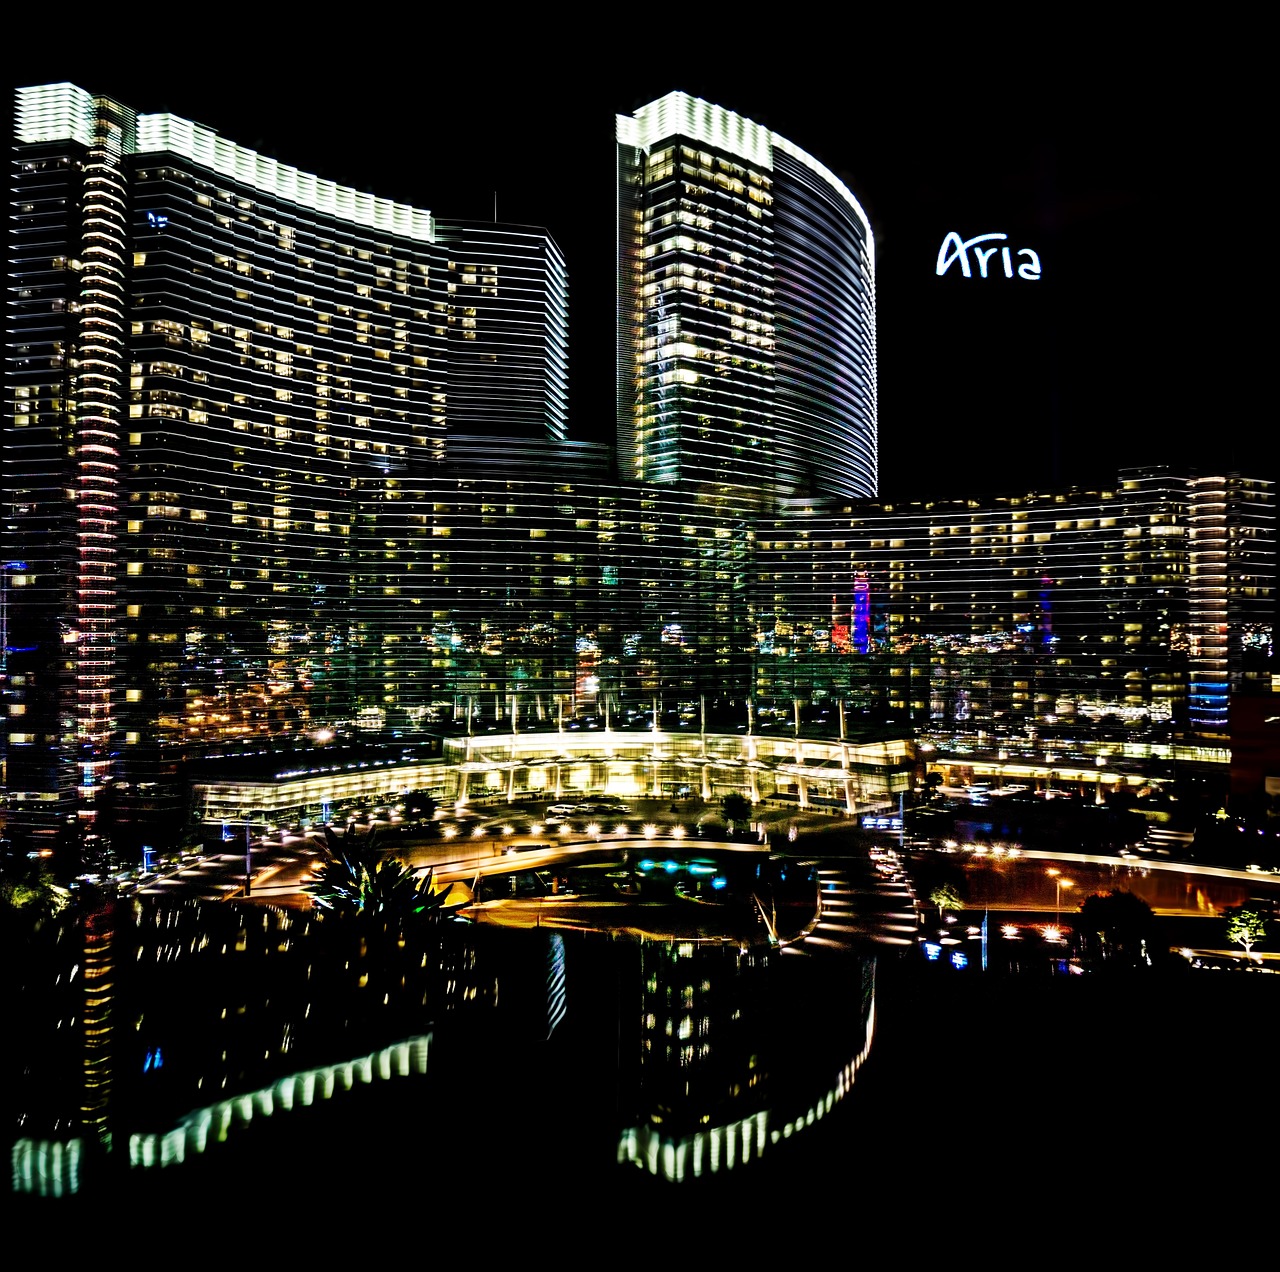 I double dipped Chase and American Express hotel benefits to save $220 at the Aria in Las Vegas. Image via Pixabay.